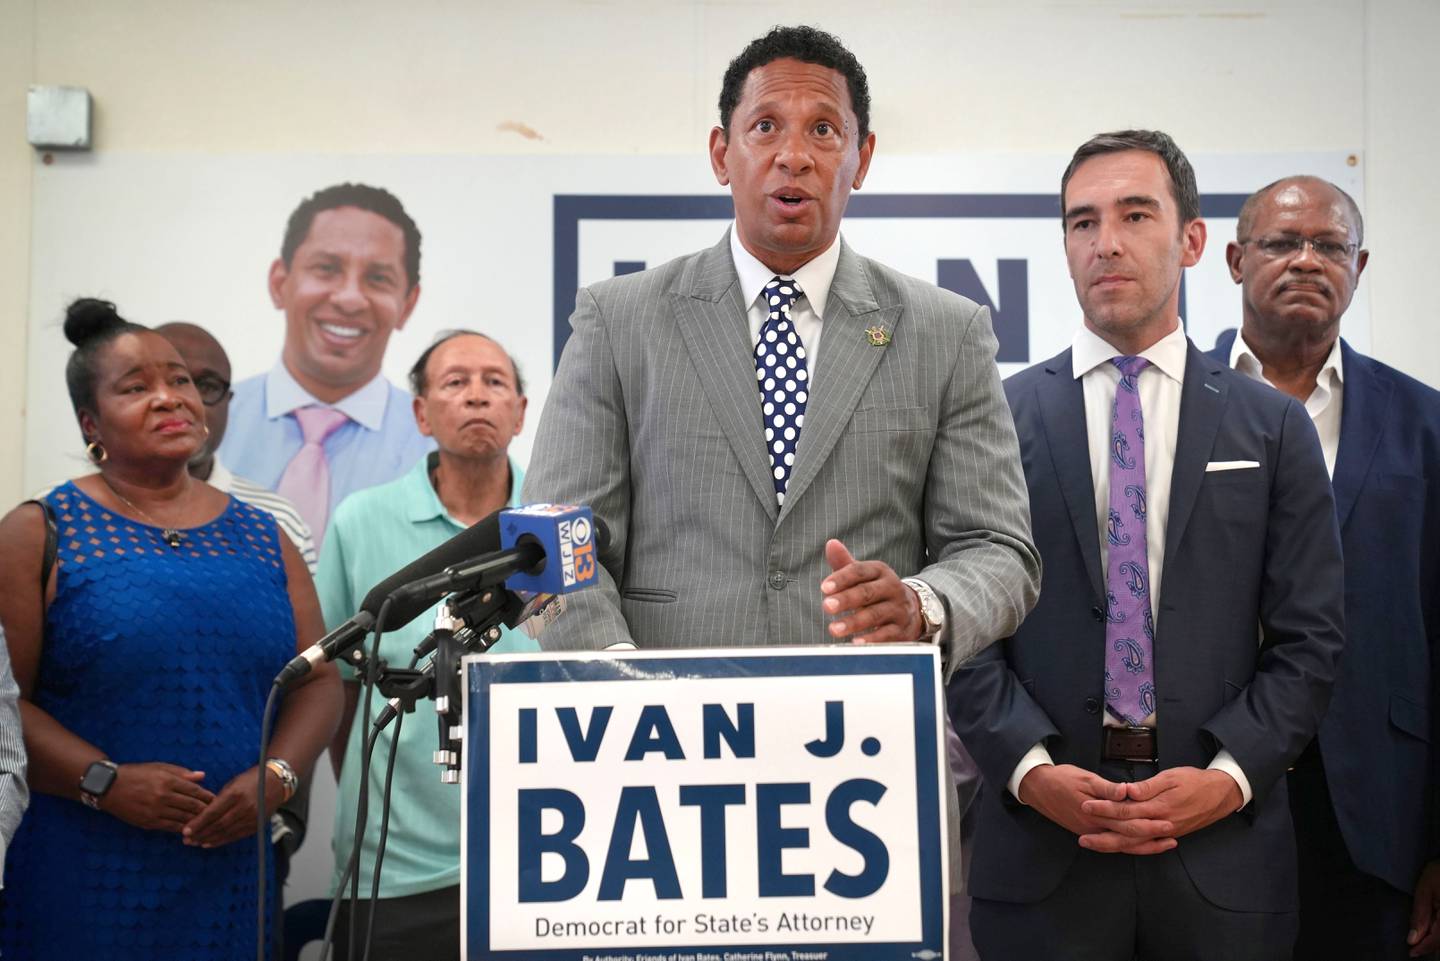 Democratic nominee for Baltimore City State’s Attorney Ivan Bates holds his first press conference since winning his primary election. Friends, family and supporters stood by his side during the presser inside his campaign headquarters in Baltimore on July 25.   Baltimore City Council member Zeke Cohen on the right, who endorsed him in the race.